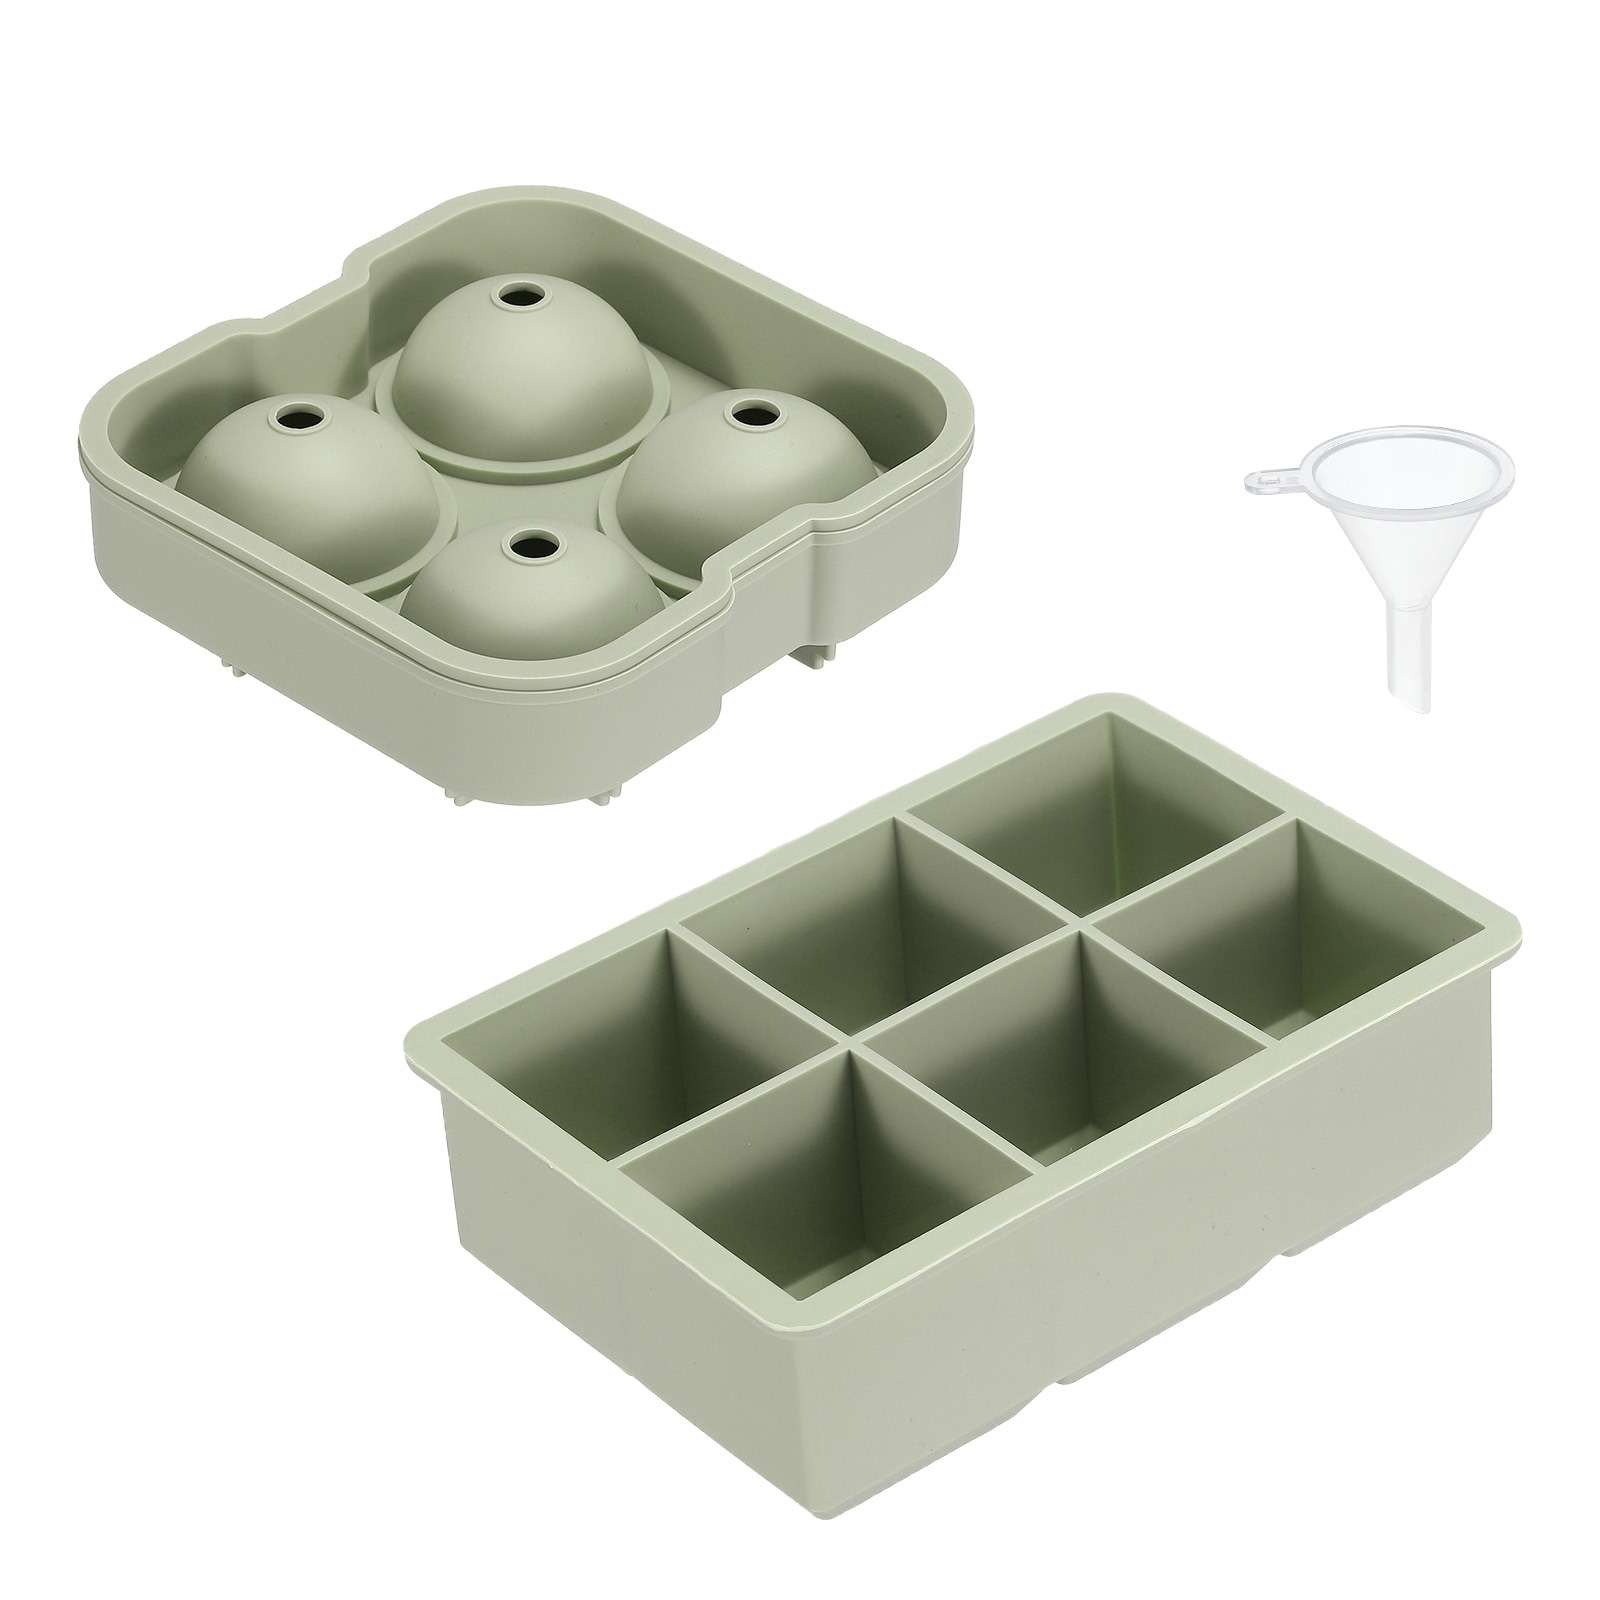 Round Ice Cube Tray, 6 Compartments